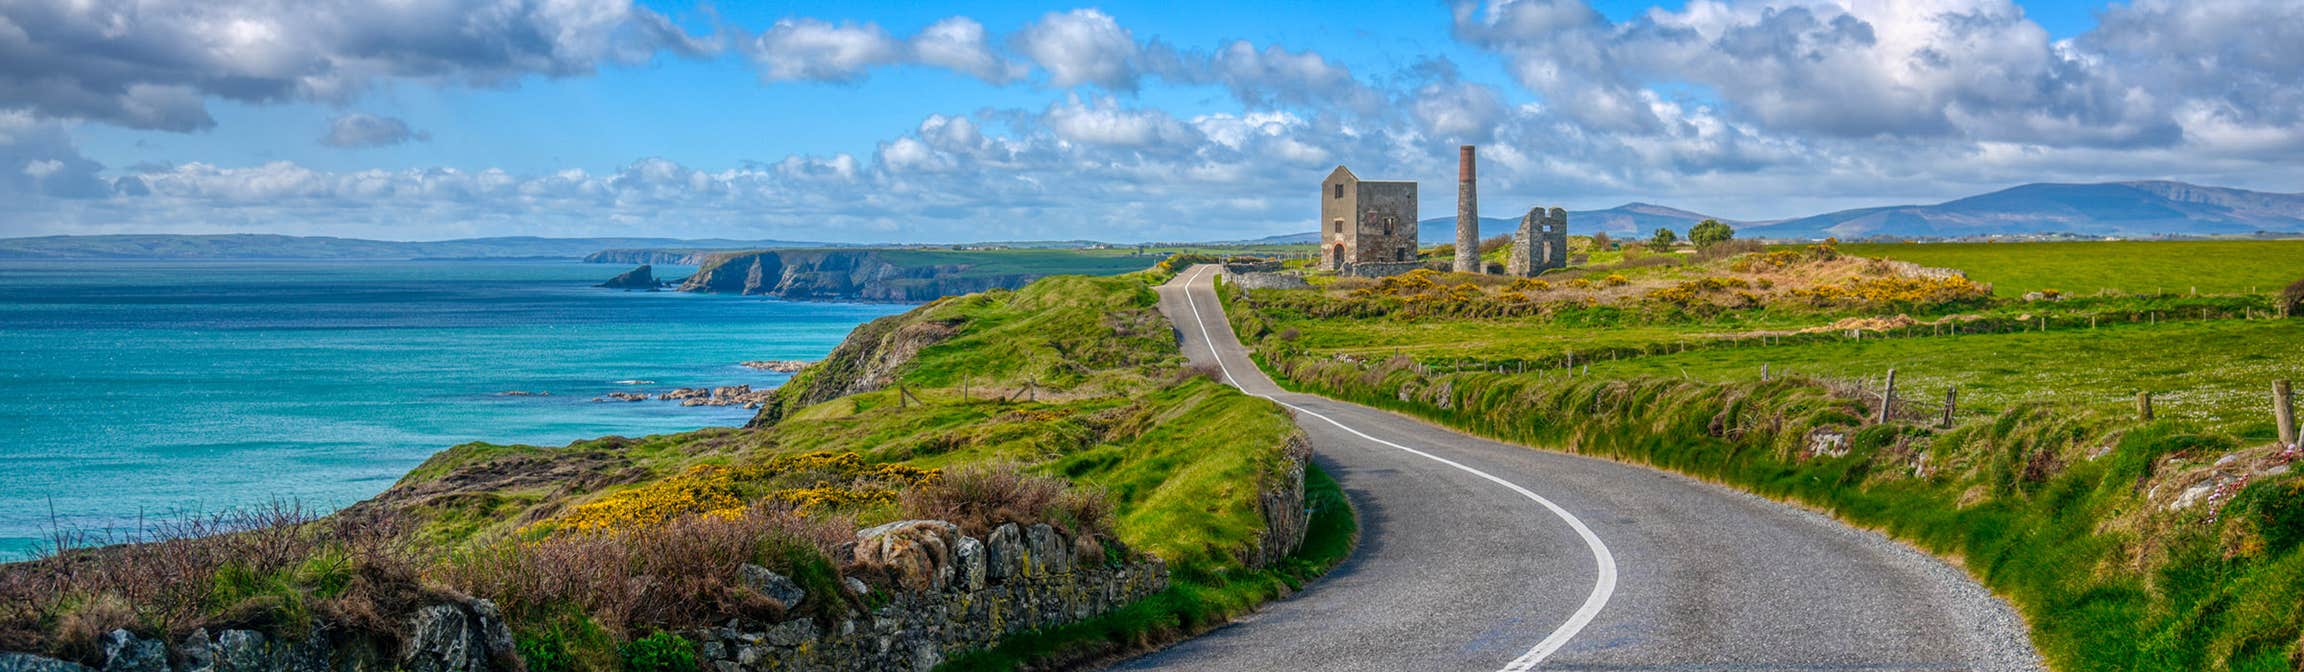 A country road beside a blue sea on the UNESCO Copper Coast, Waterford in Ireland's Ancient East.